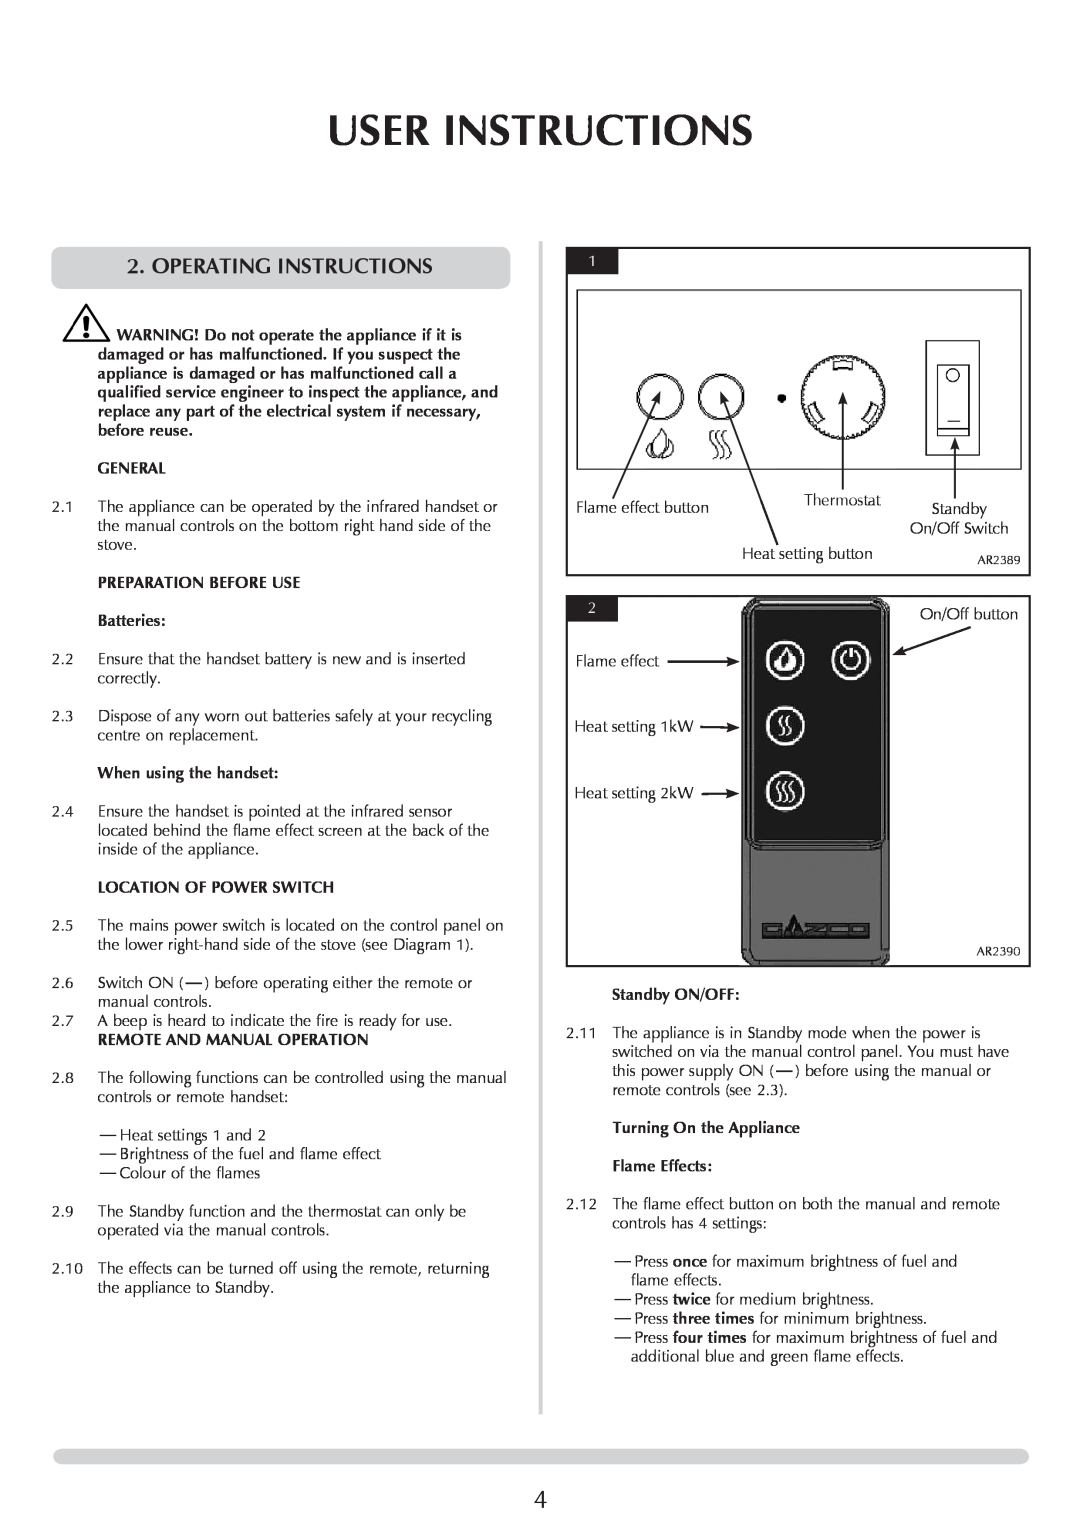 Yeoman YM-E9001FLA Operating instructions, User Instructions, General, PREPARATION BEFORE USE Batteries, Standby ON/OFF 